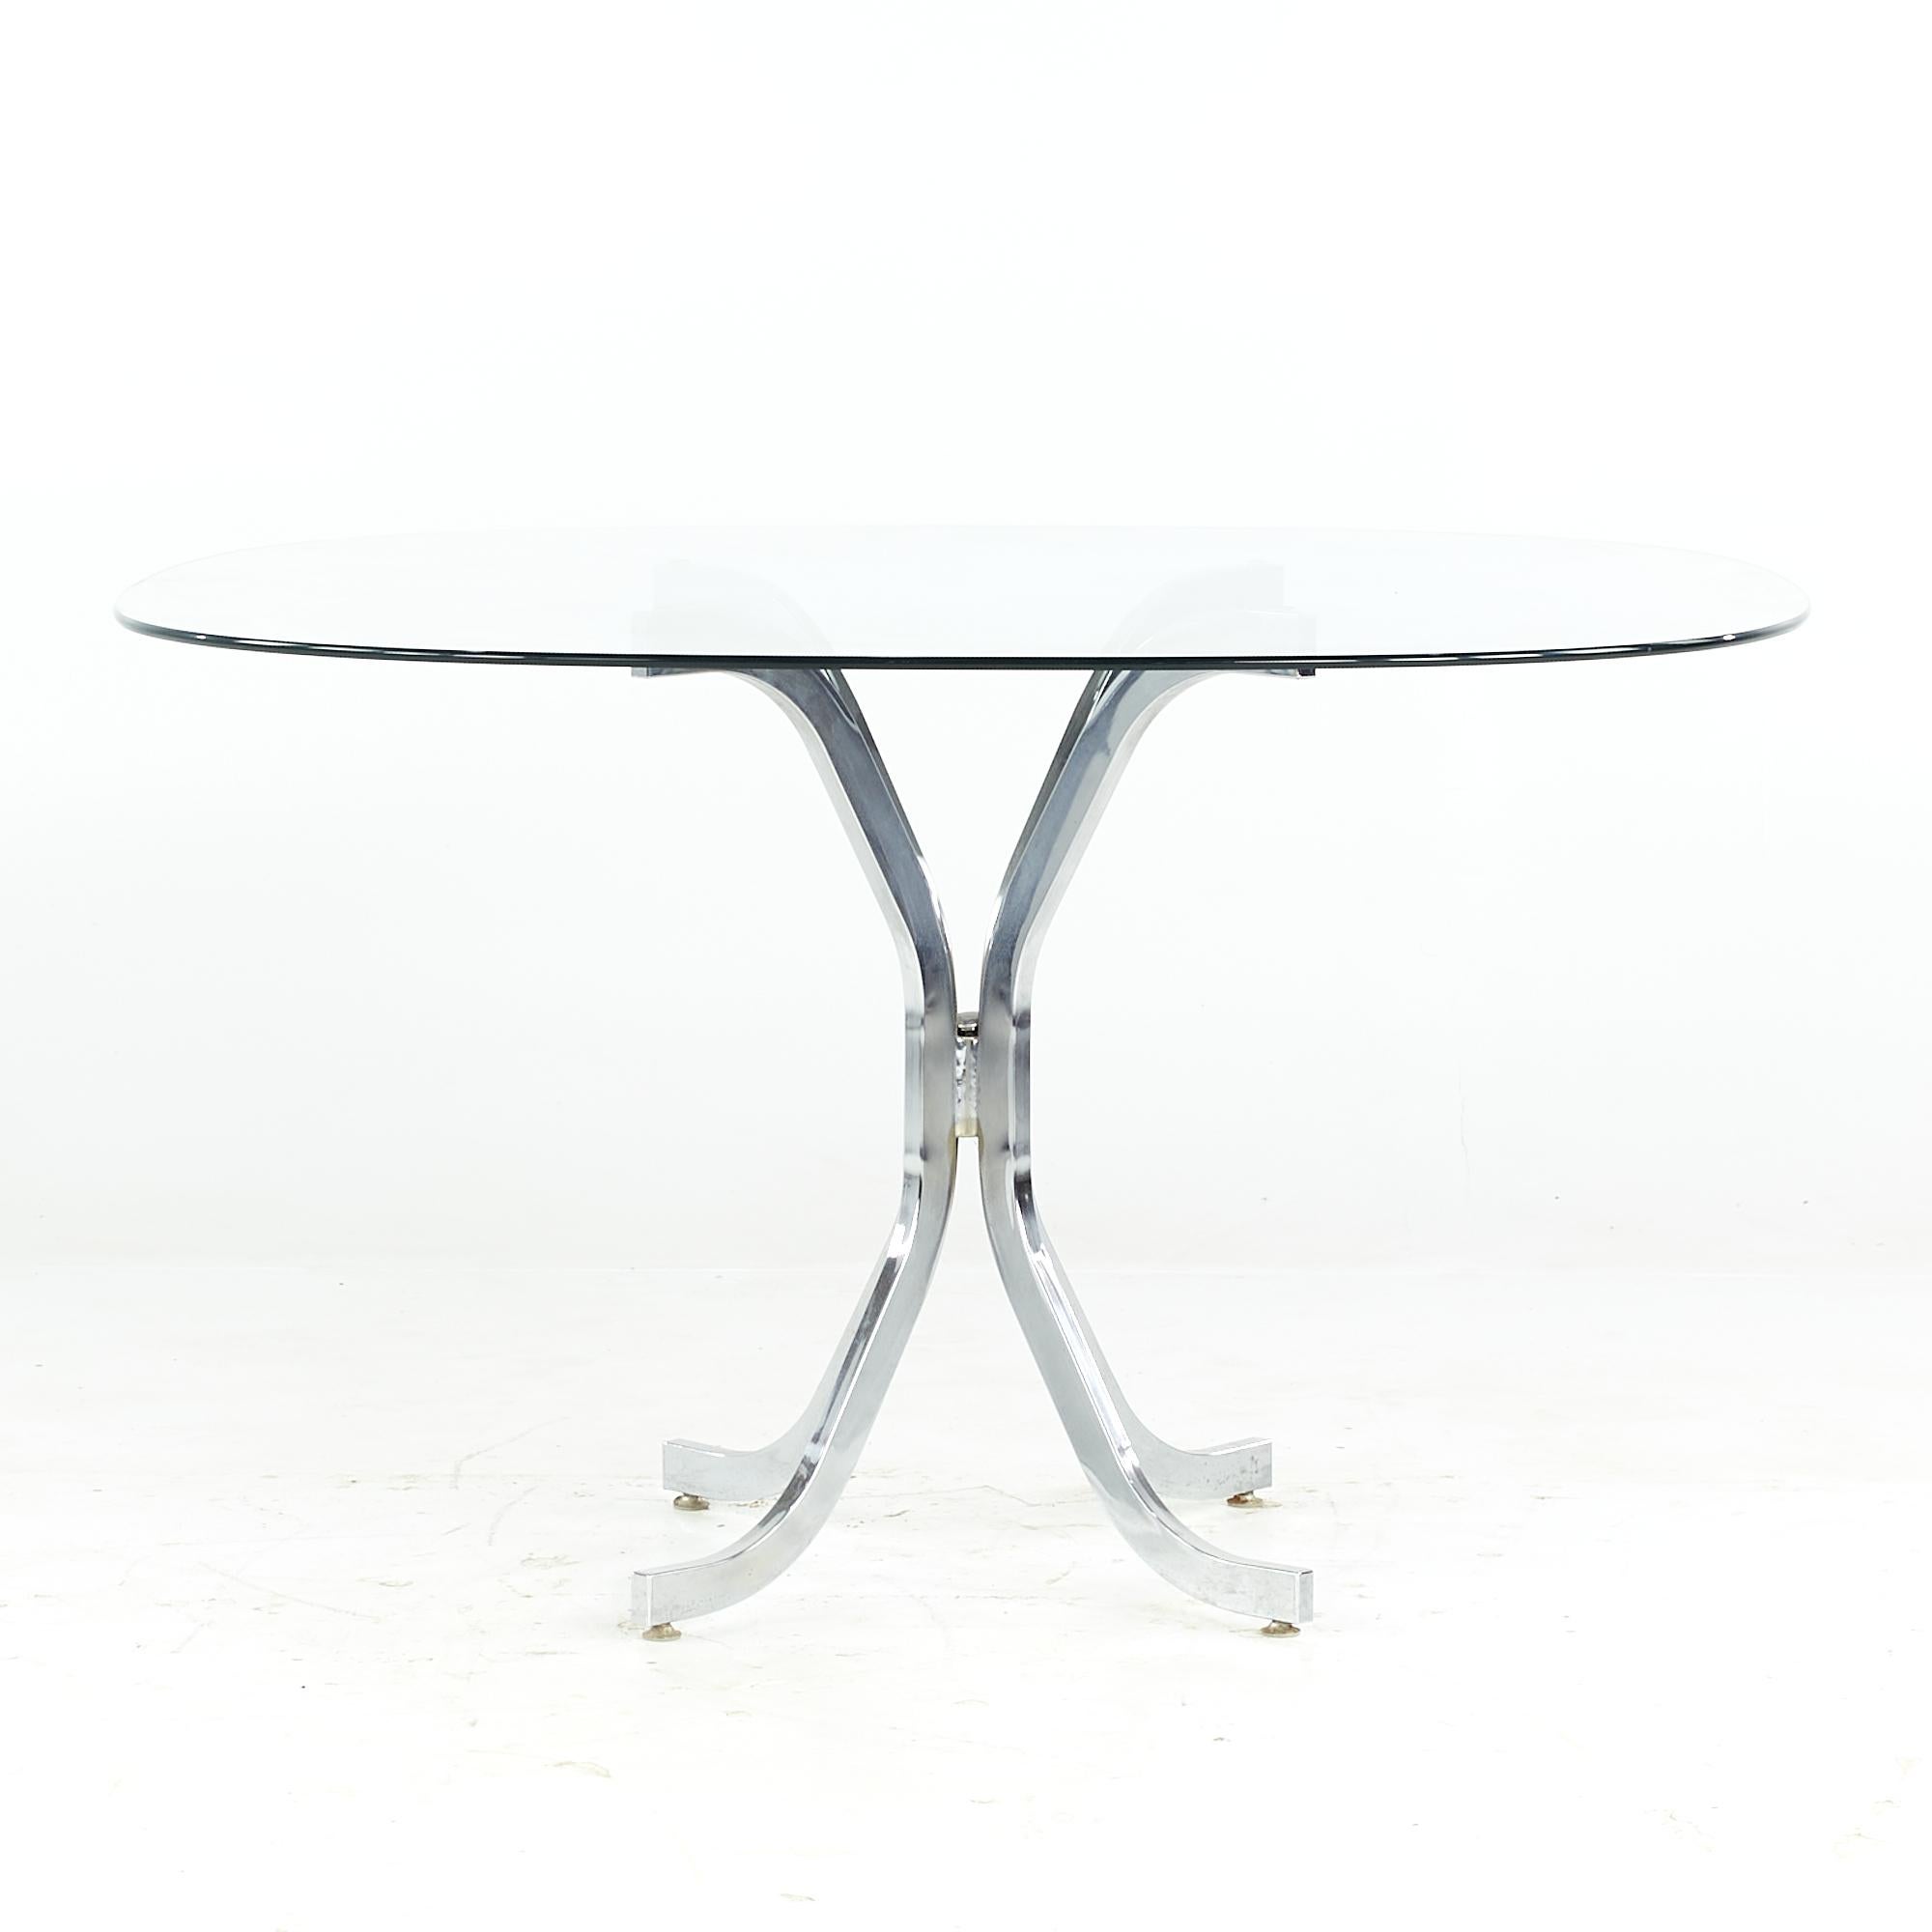 Milo Baughman Style midcentury Glass and Chrome Dining Room Table

This dining table measures: 48 wide x 48 deep x 29.25 high, with a chair clearance of 28.75 inches

All pieces of furniture can be had in what we call restored vintage condition.